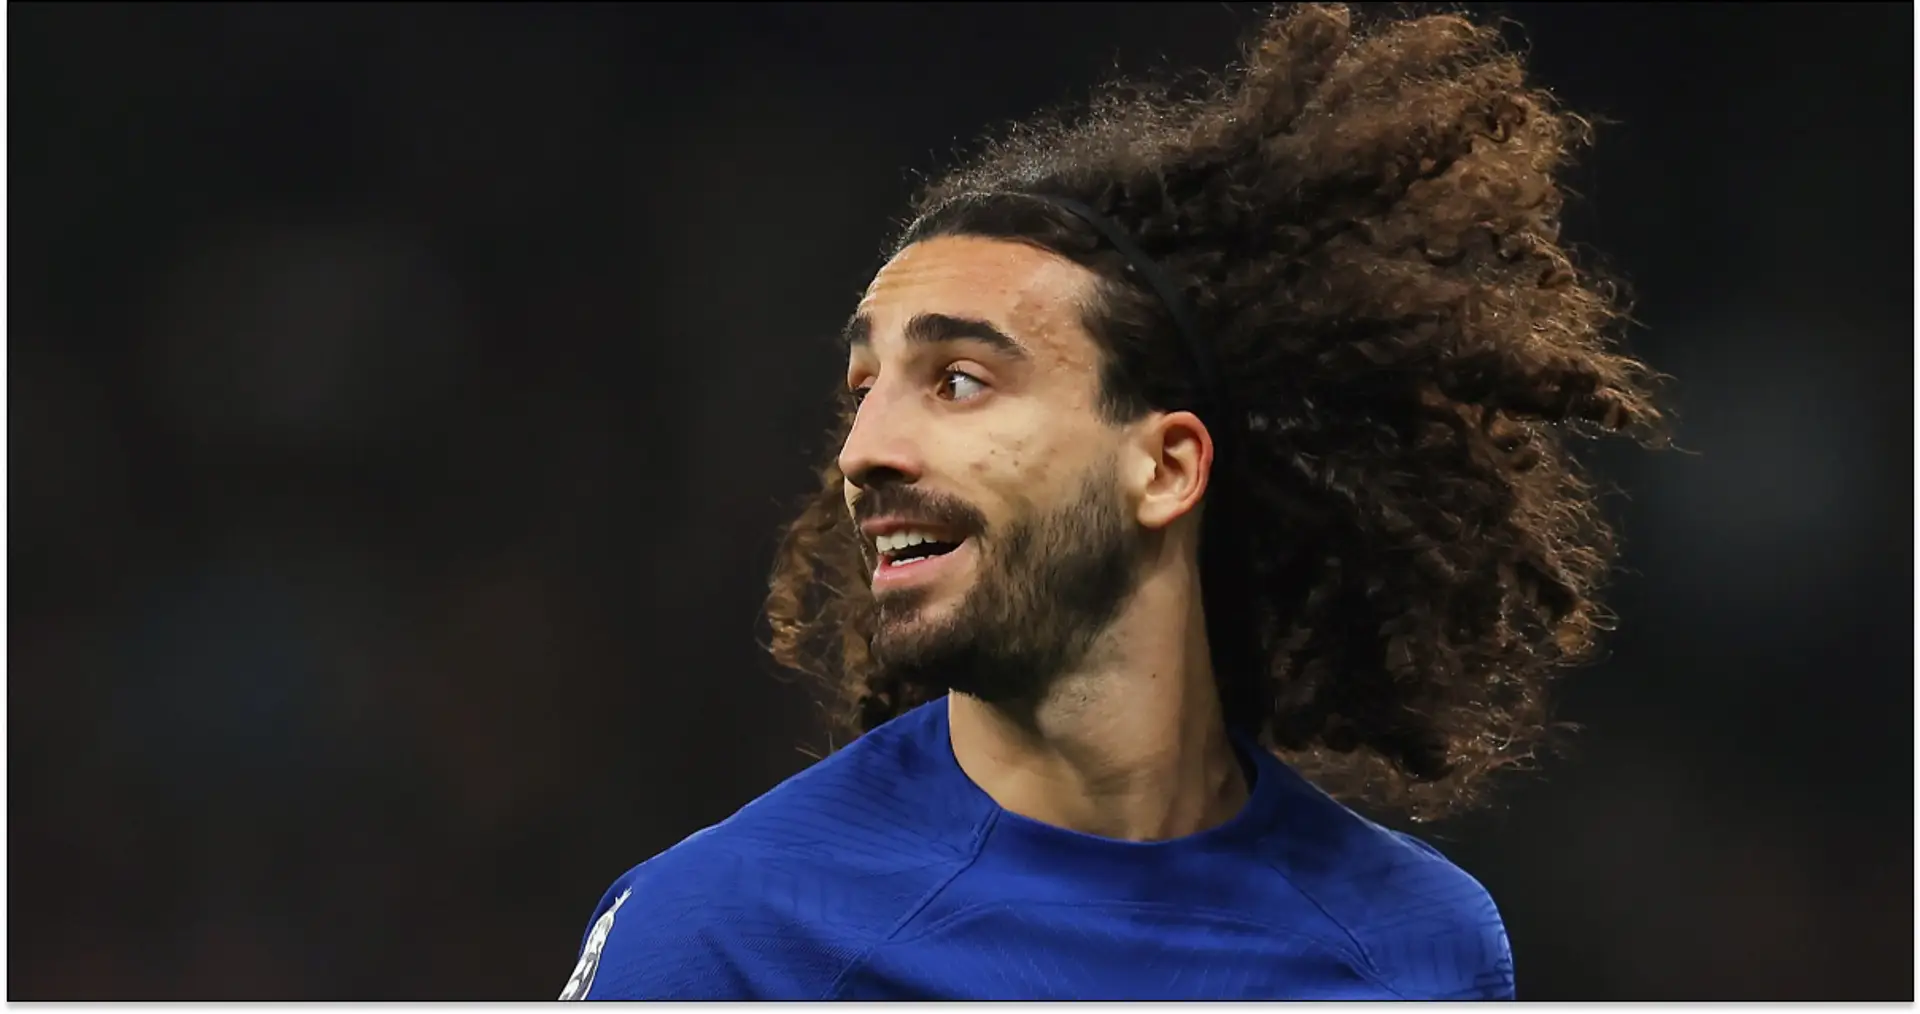 'I need to manage the head': Cucurella shares his plan to get more minutes at Chelsea